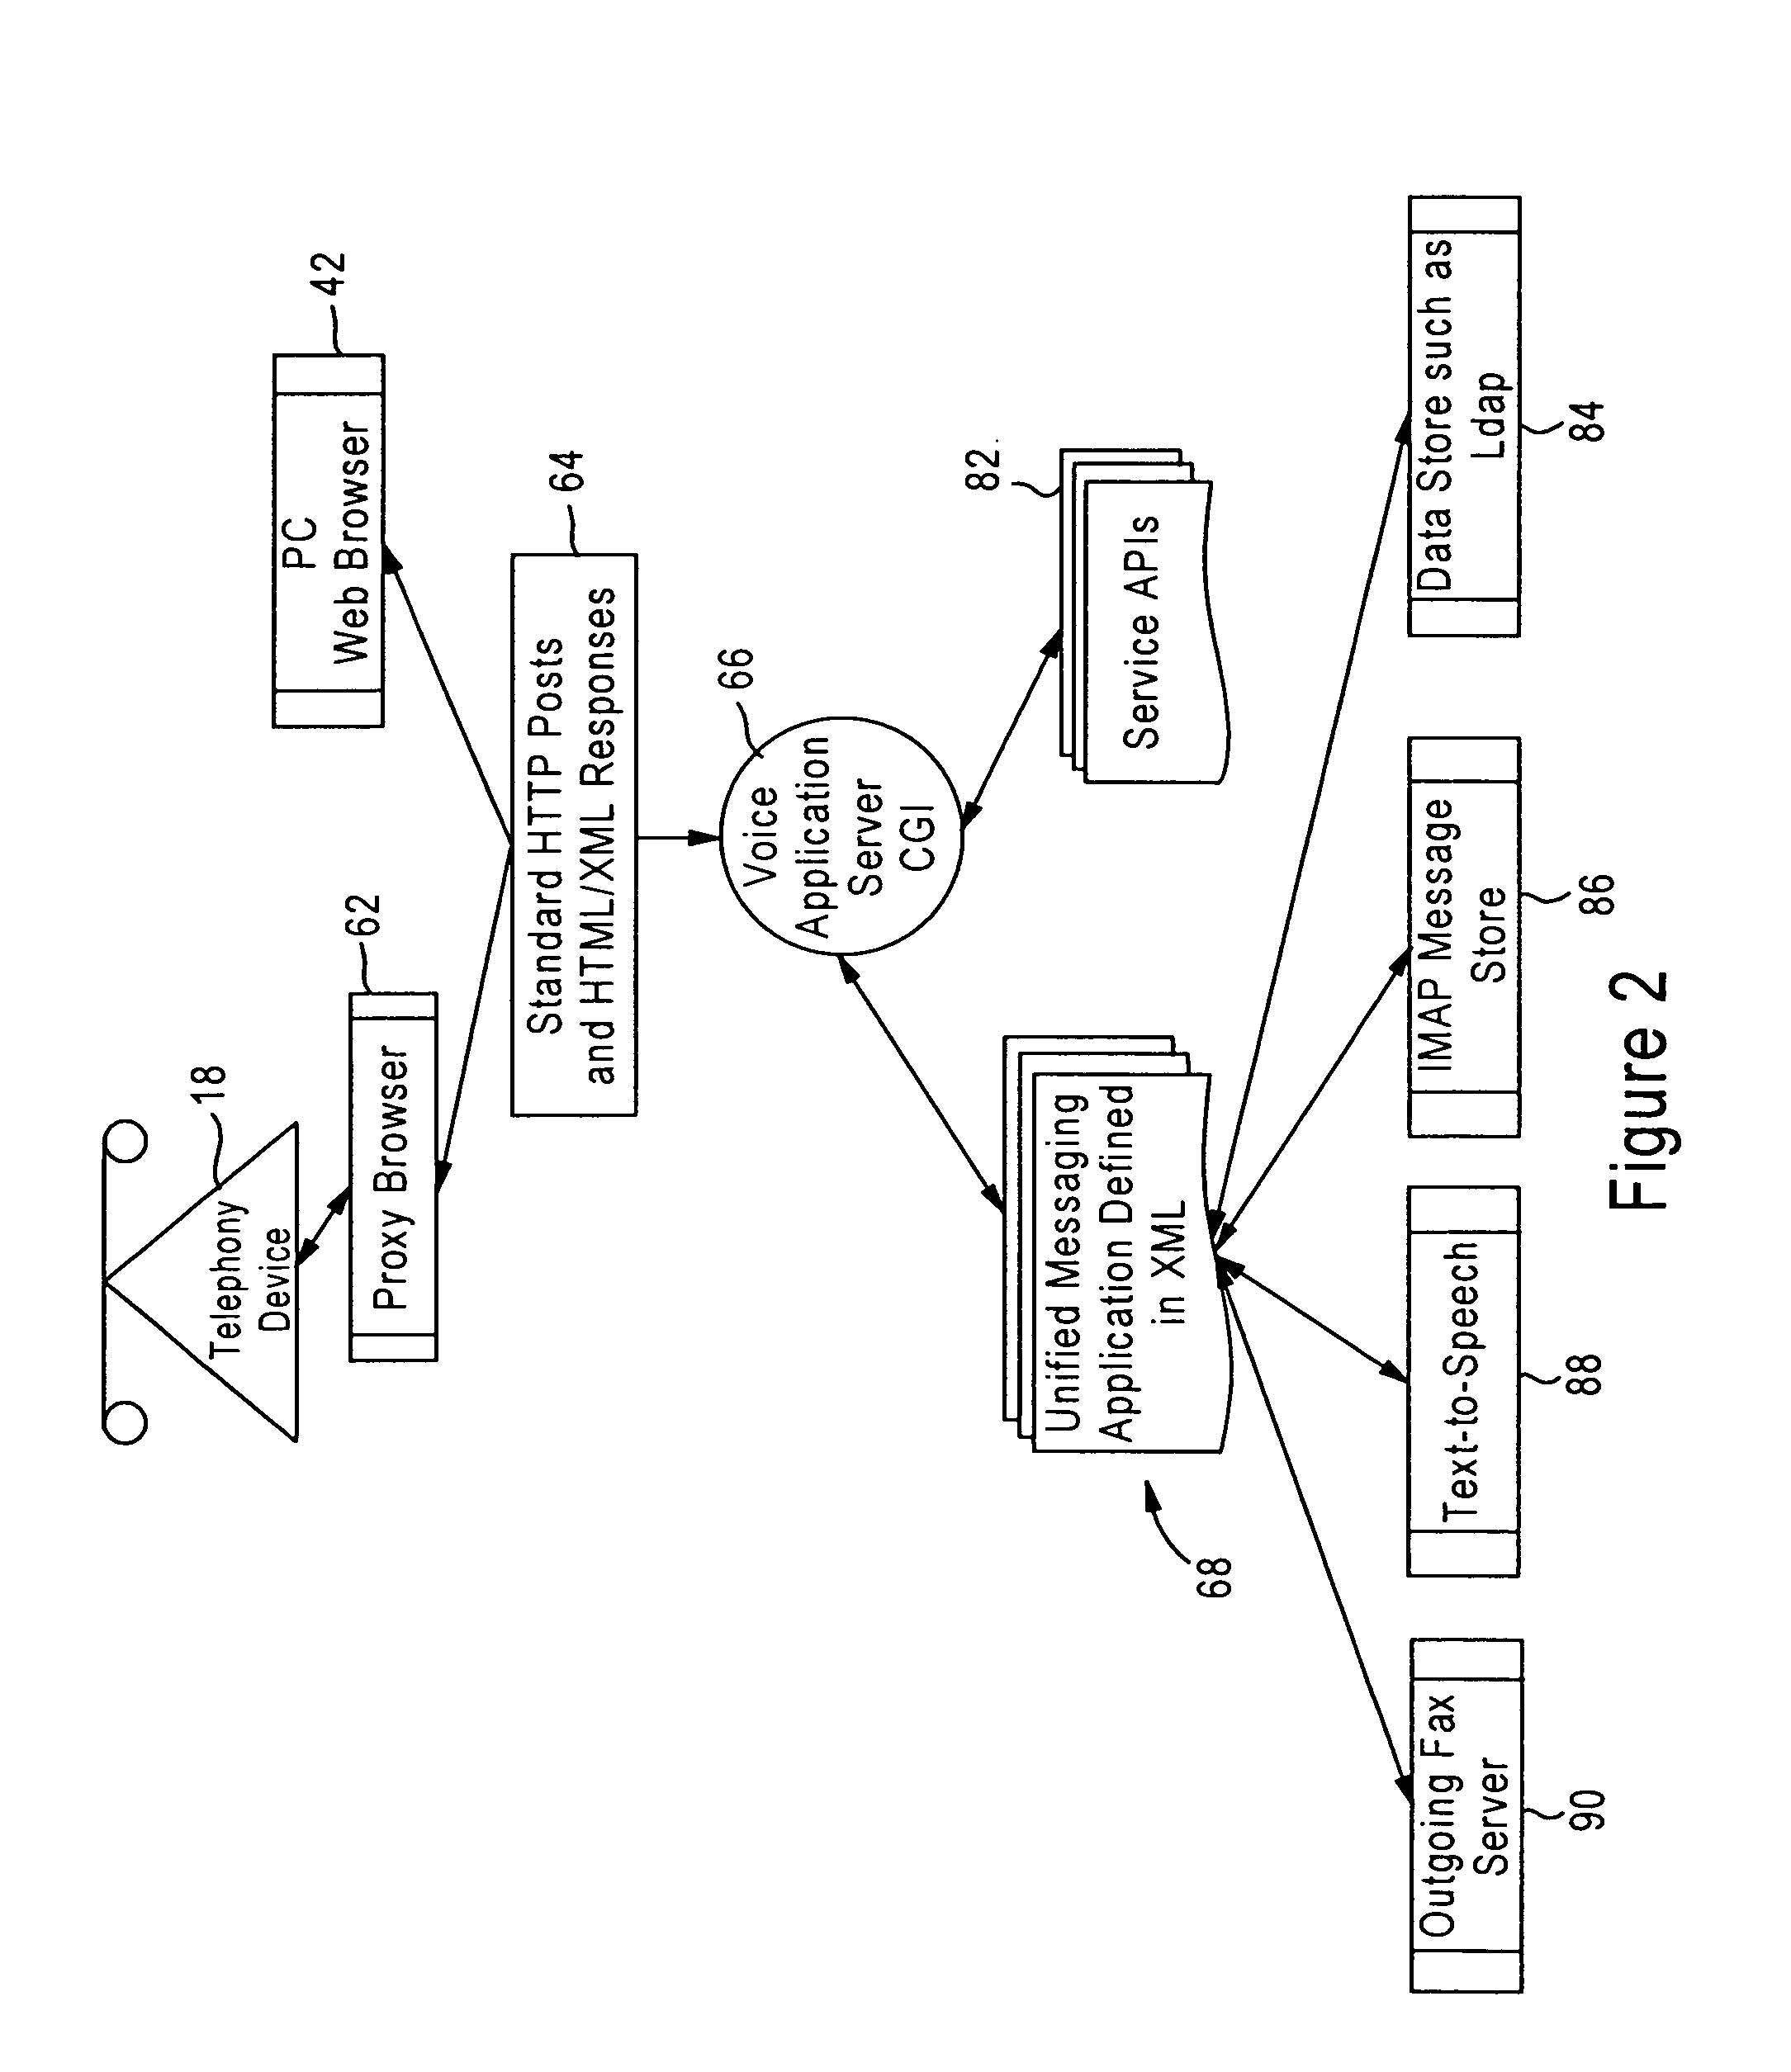 Unified messaging system using web based application server for management of messages using standardized servers